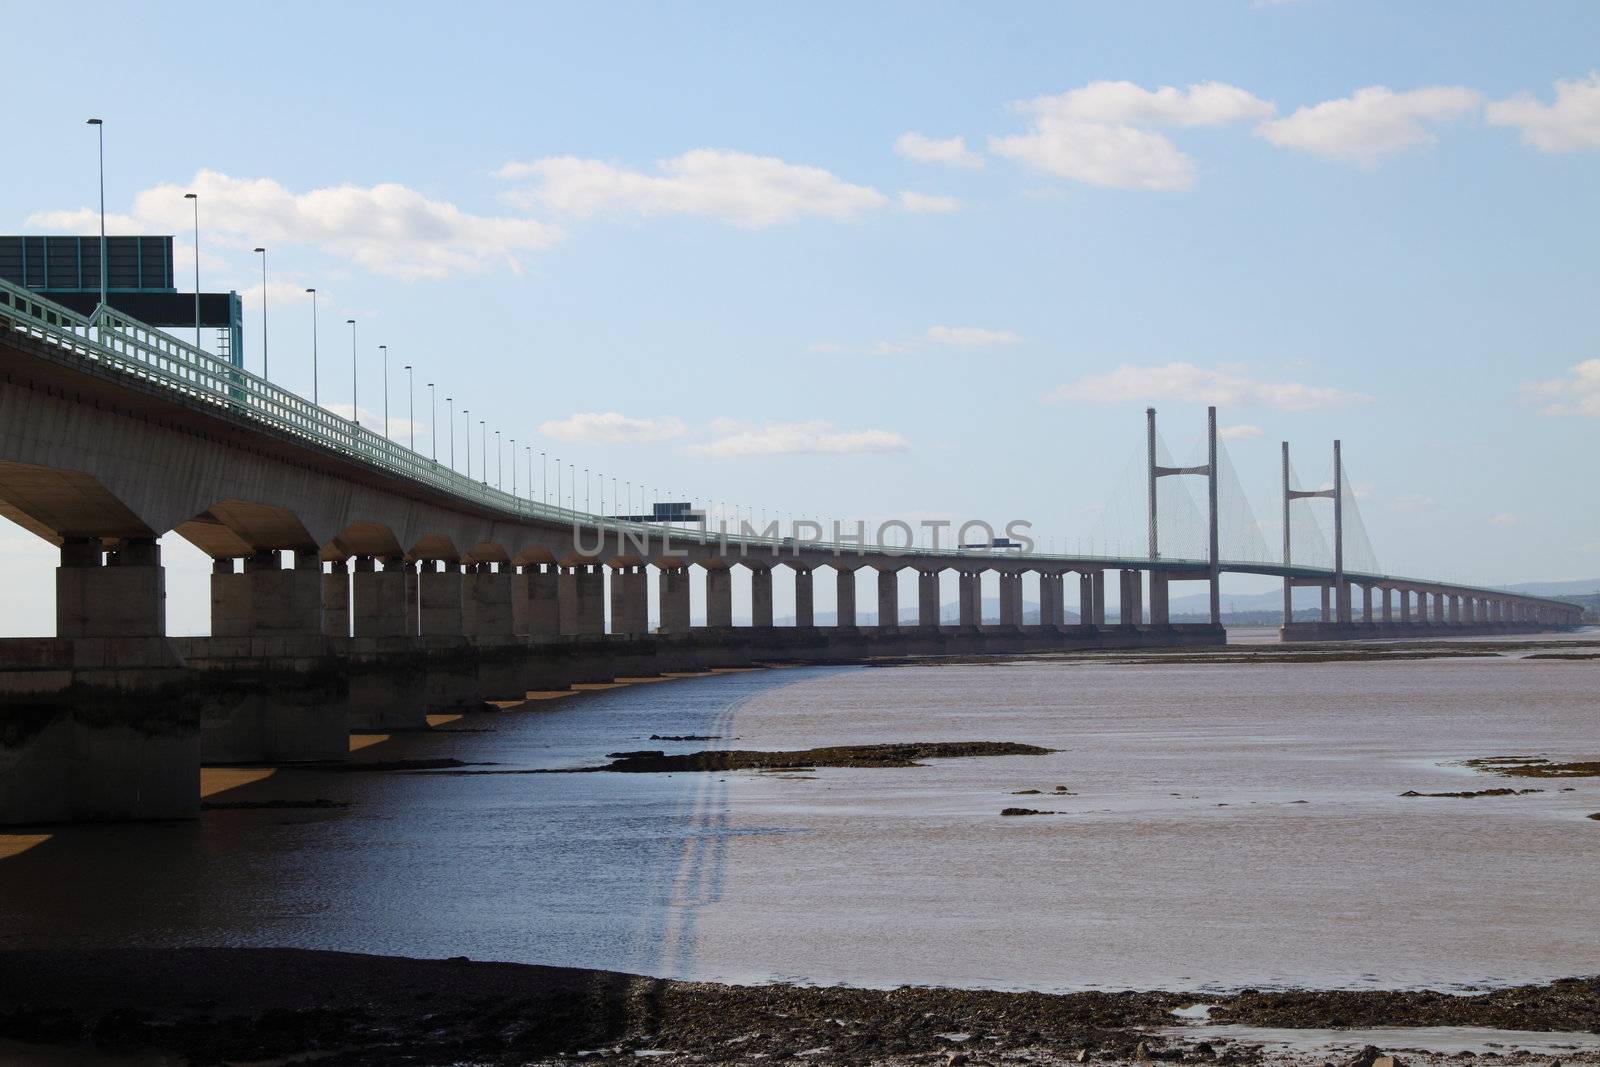 View of the second Severn crossing from the English bank of the river